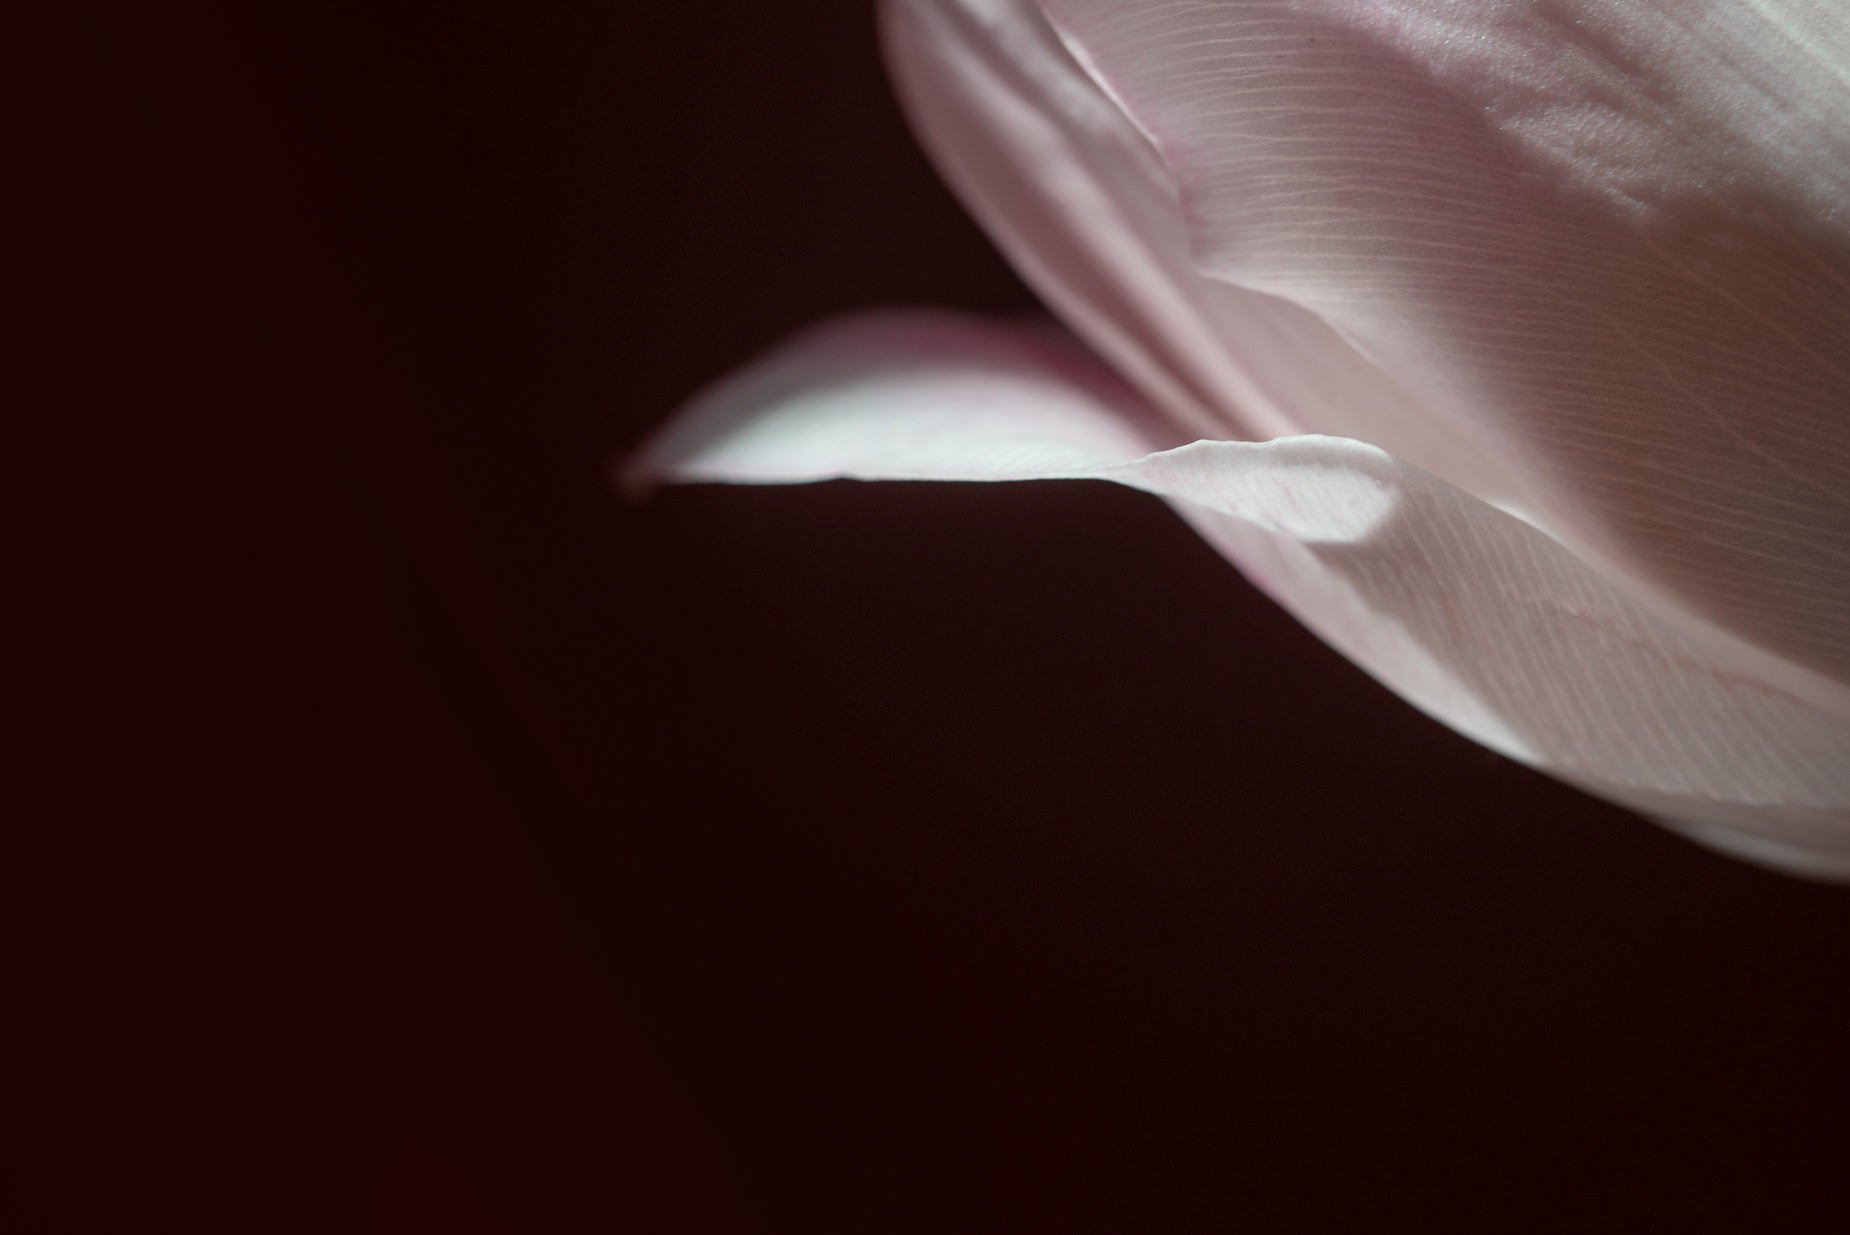 the side view of a flower petals that have been pographed in close - up